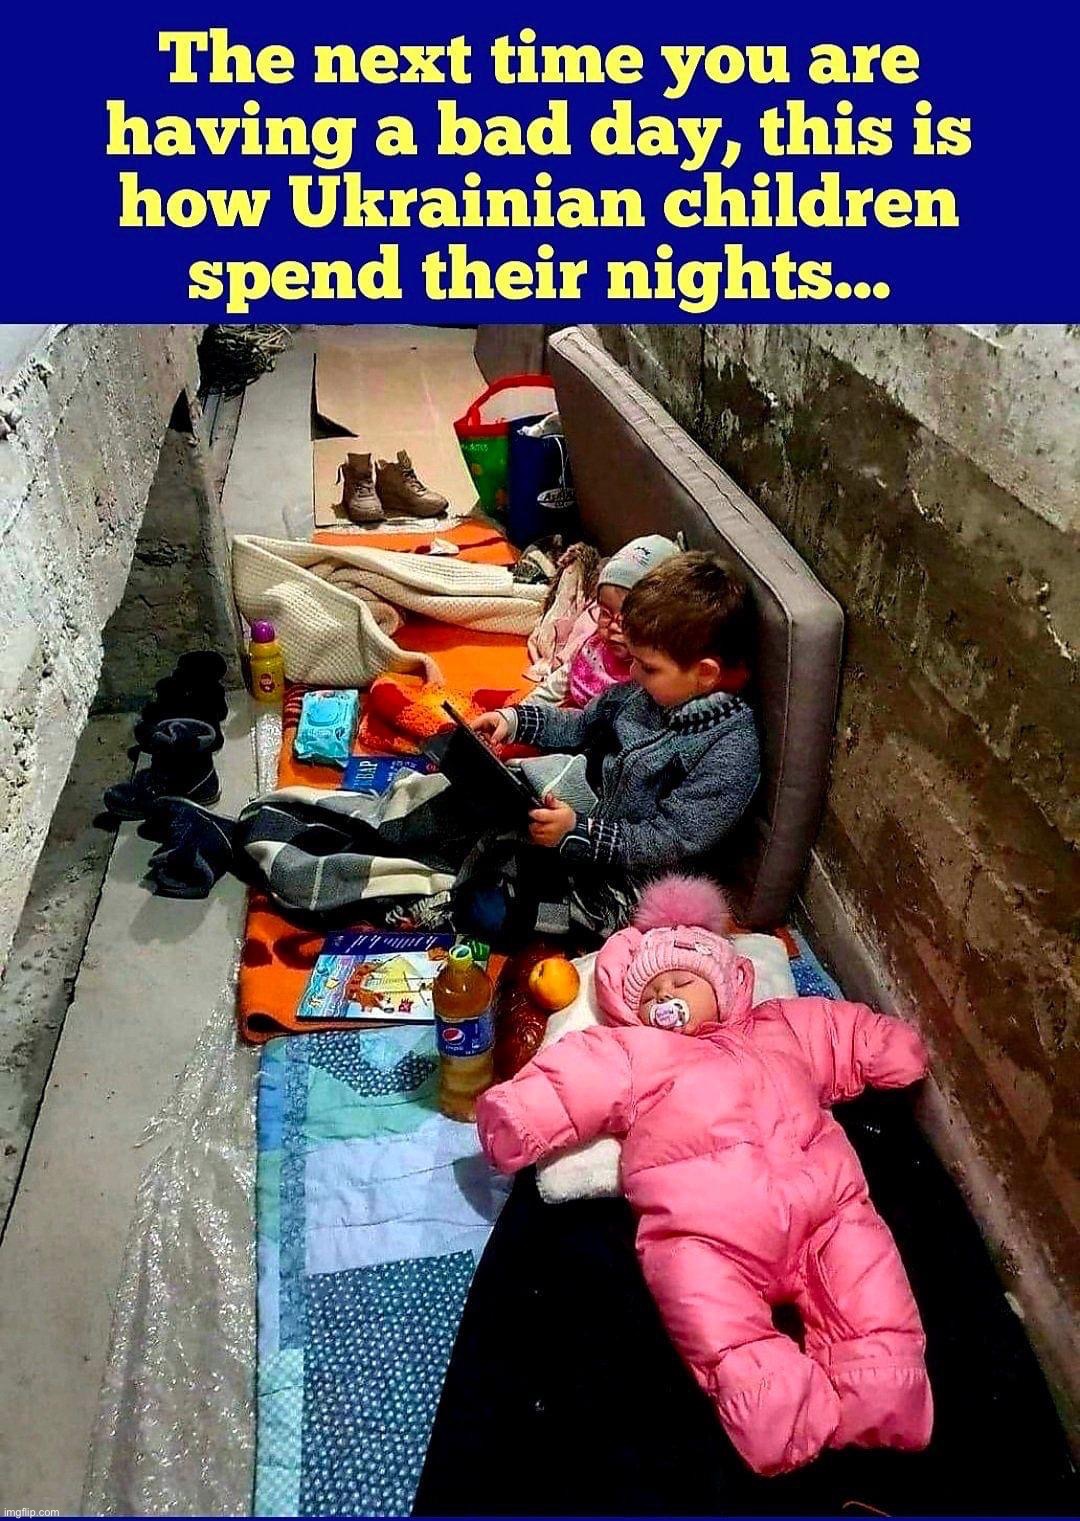 How Ukrainian children spend their nights | image tagged in how ukrainian children spend their nights,ukraine,ukrainian lives matter,ukrainian,bad day,having a bad day | made w/ Imgflip meme maker